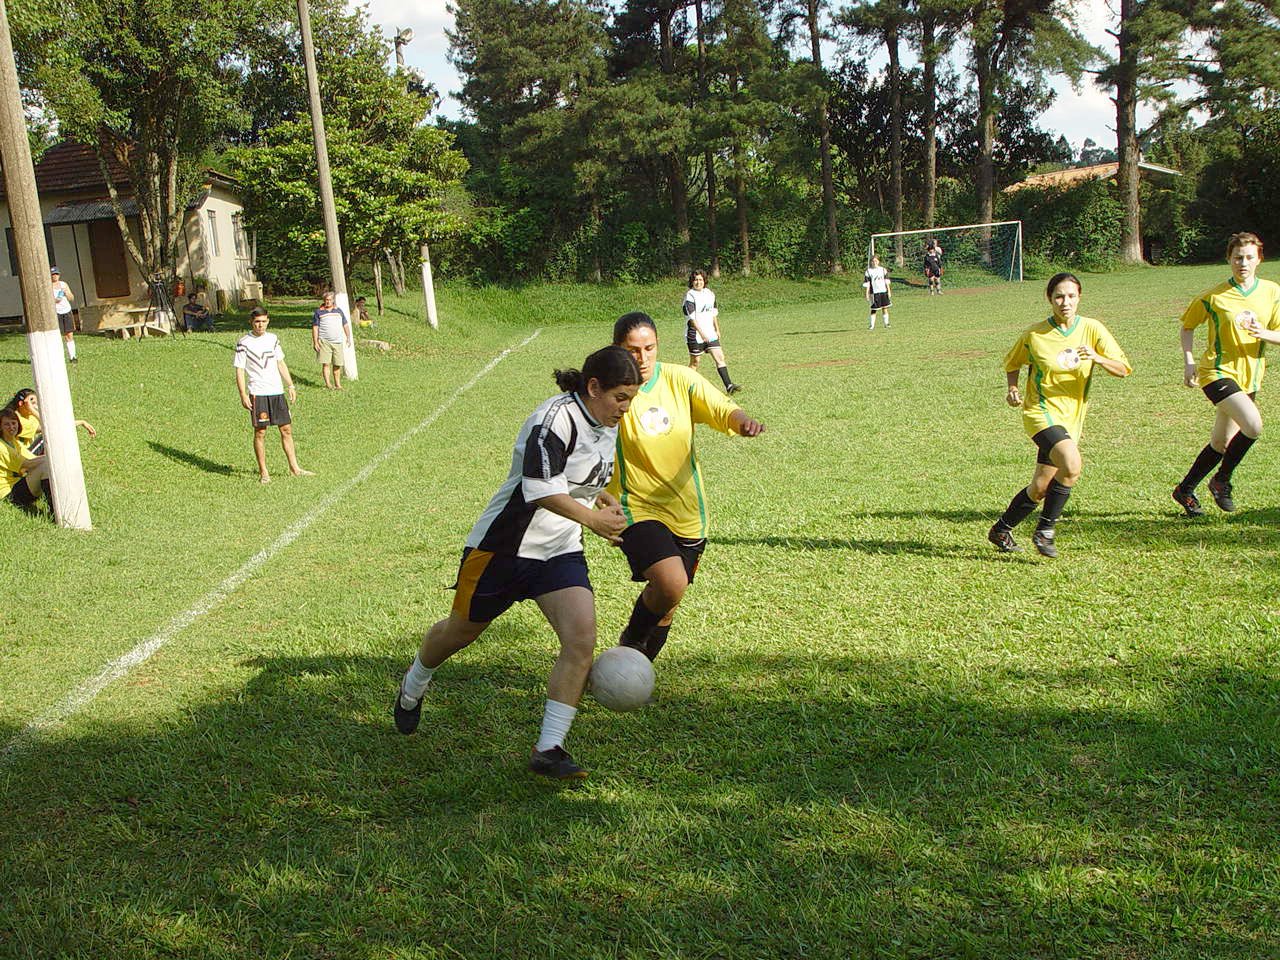 a group of young people kicking around a soccer ball